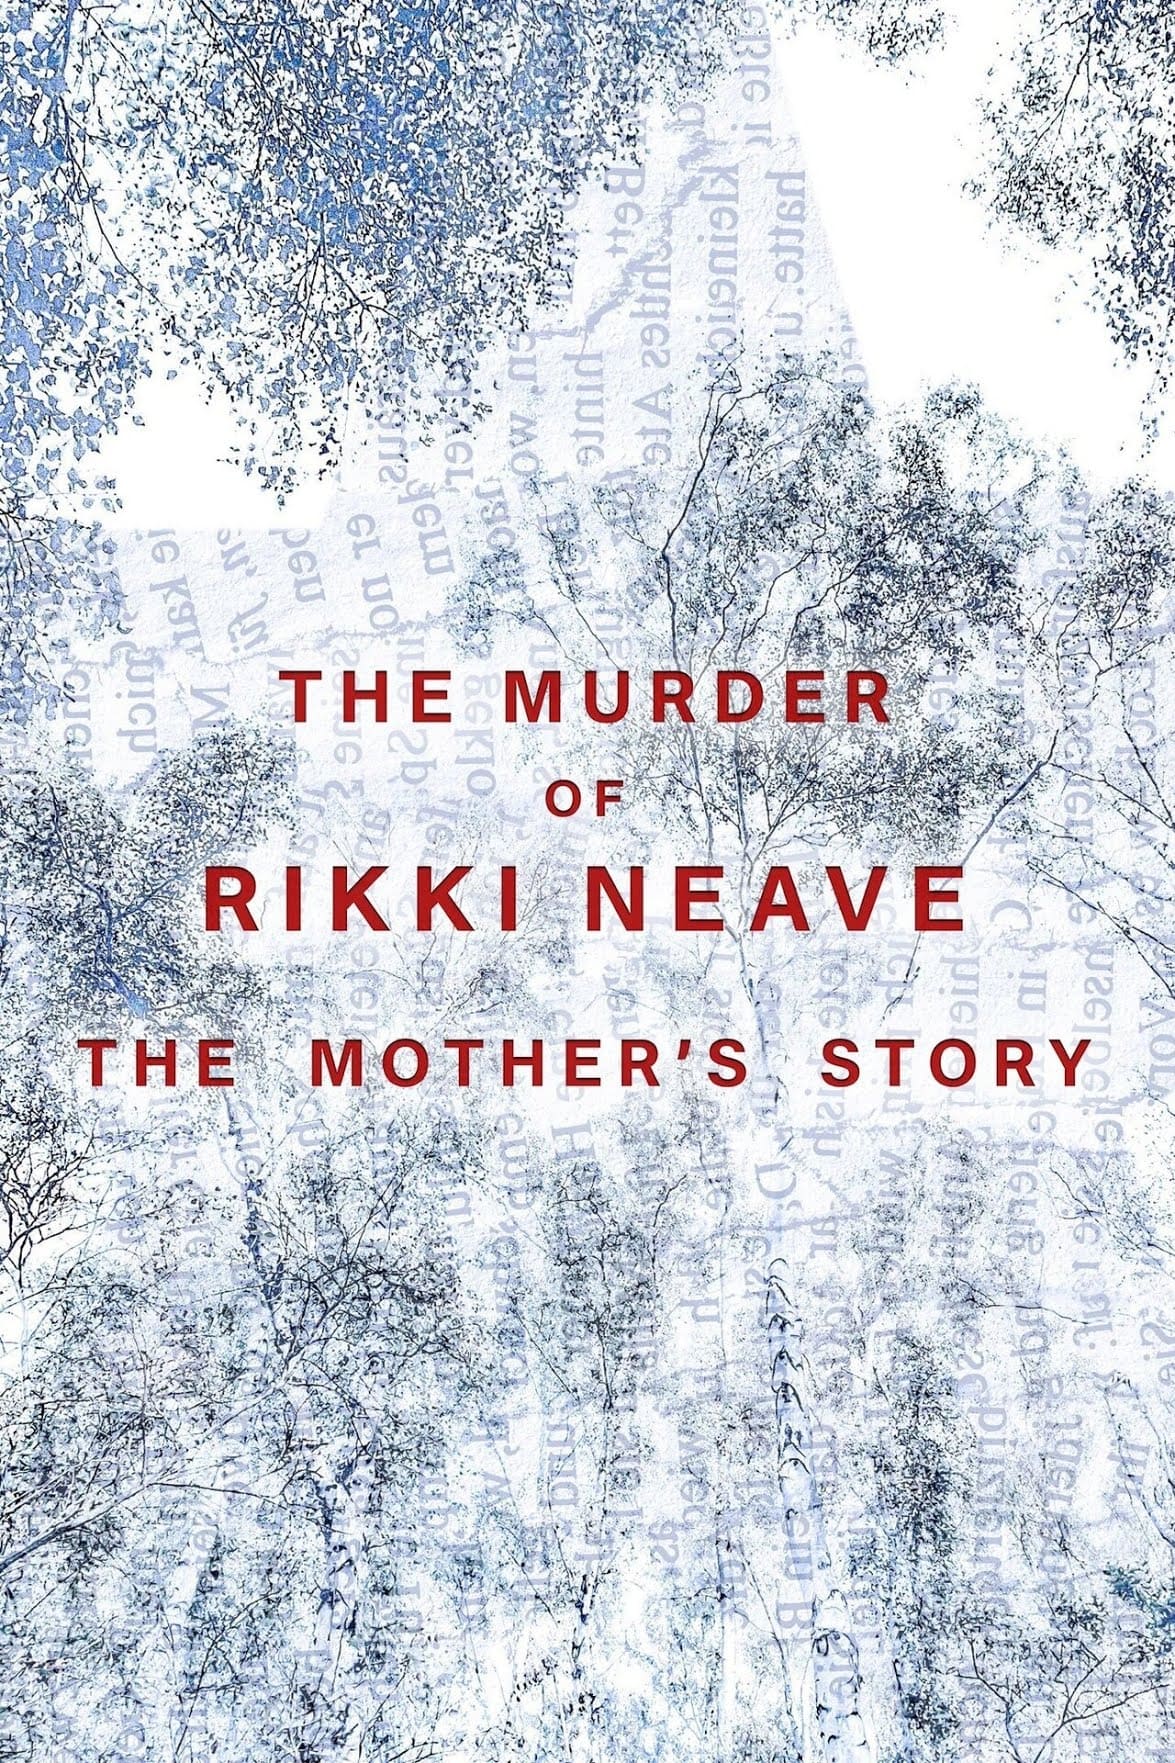 The Murder of Rikki Neave: The Mother's Story